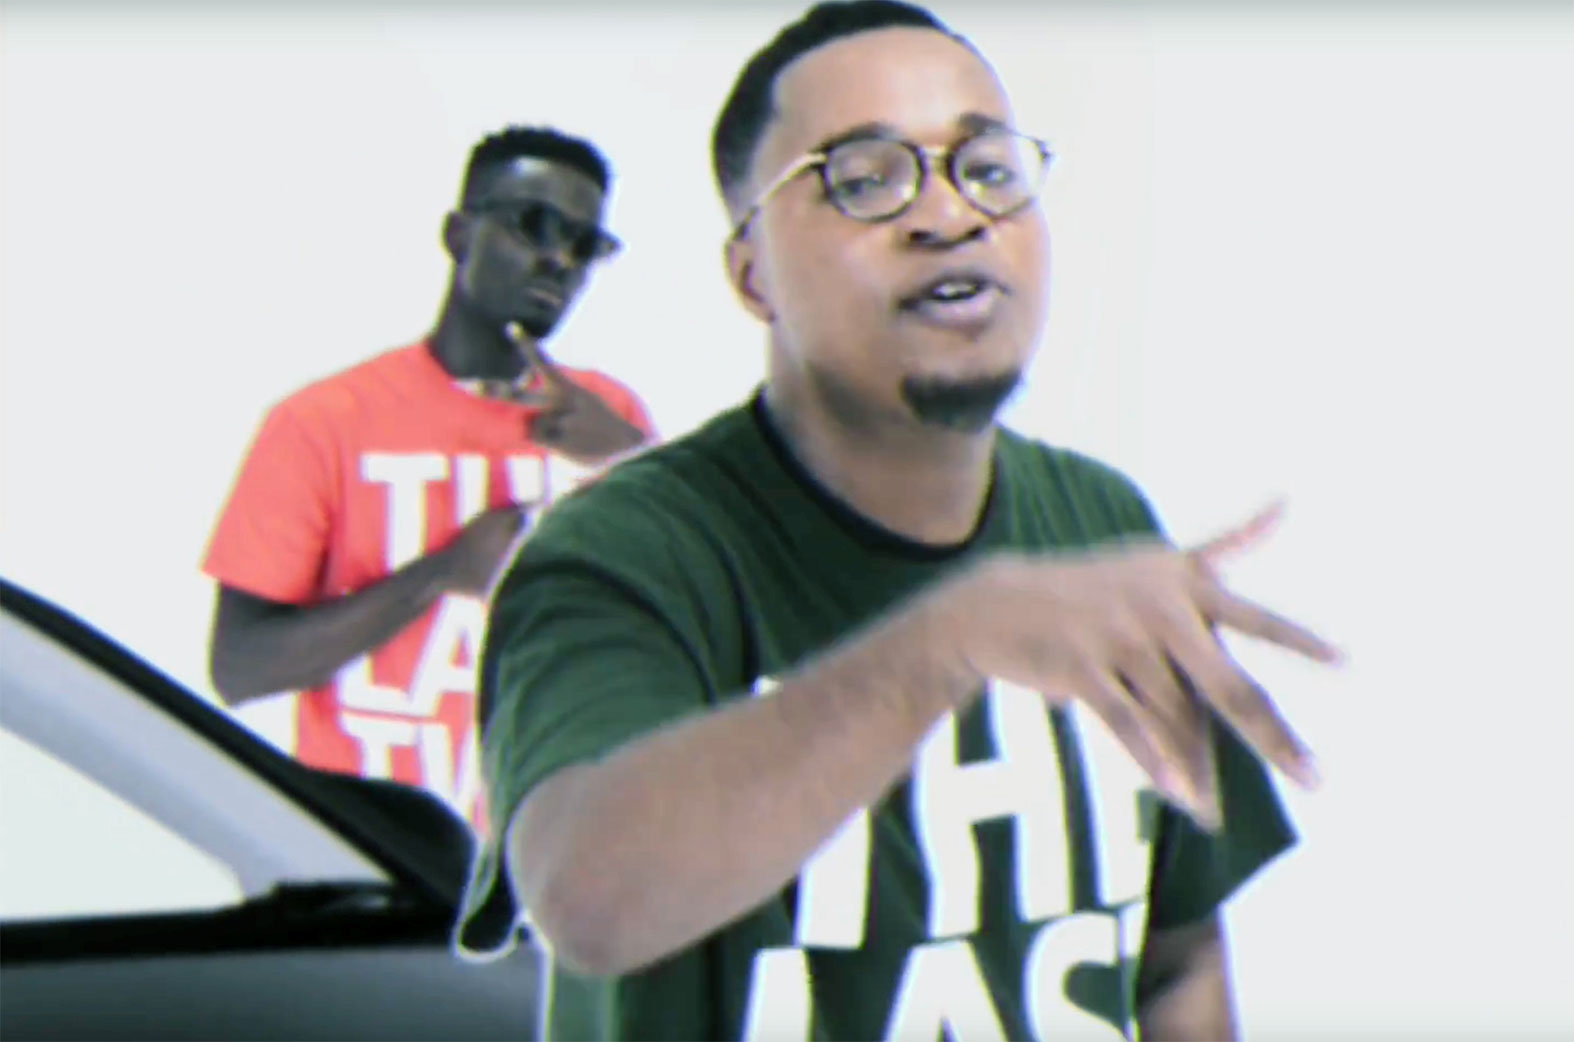 Ko-Jo Cue, Lil Shaker, Untitled, Pen and Paper, Video Premiere